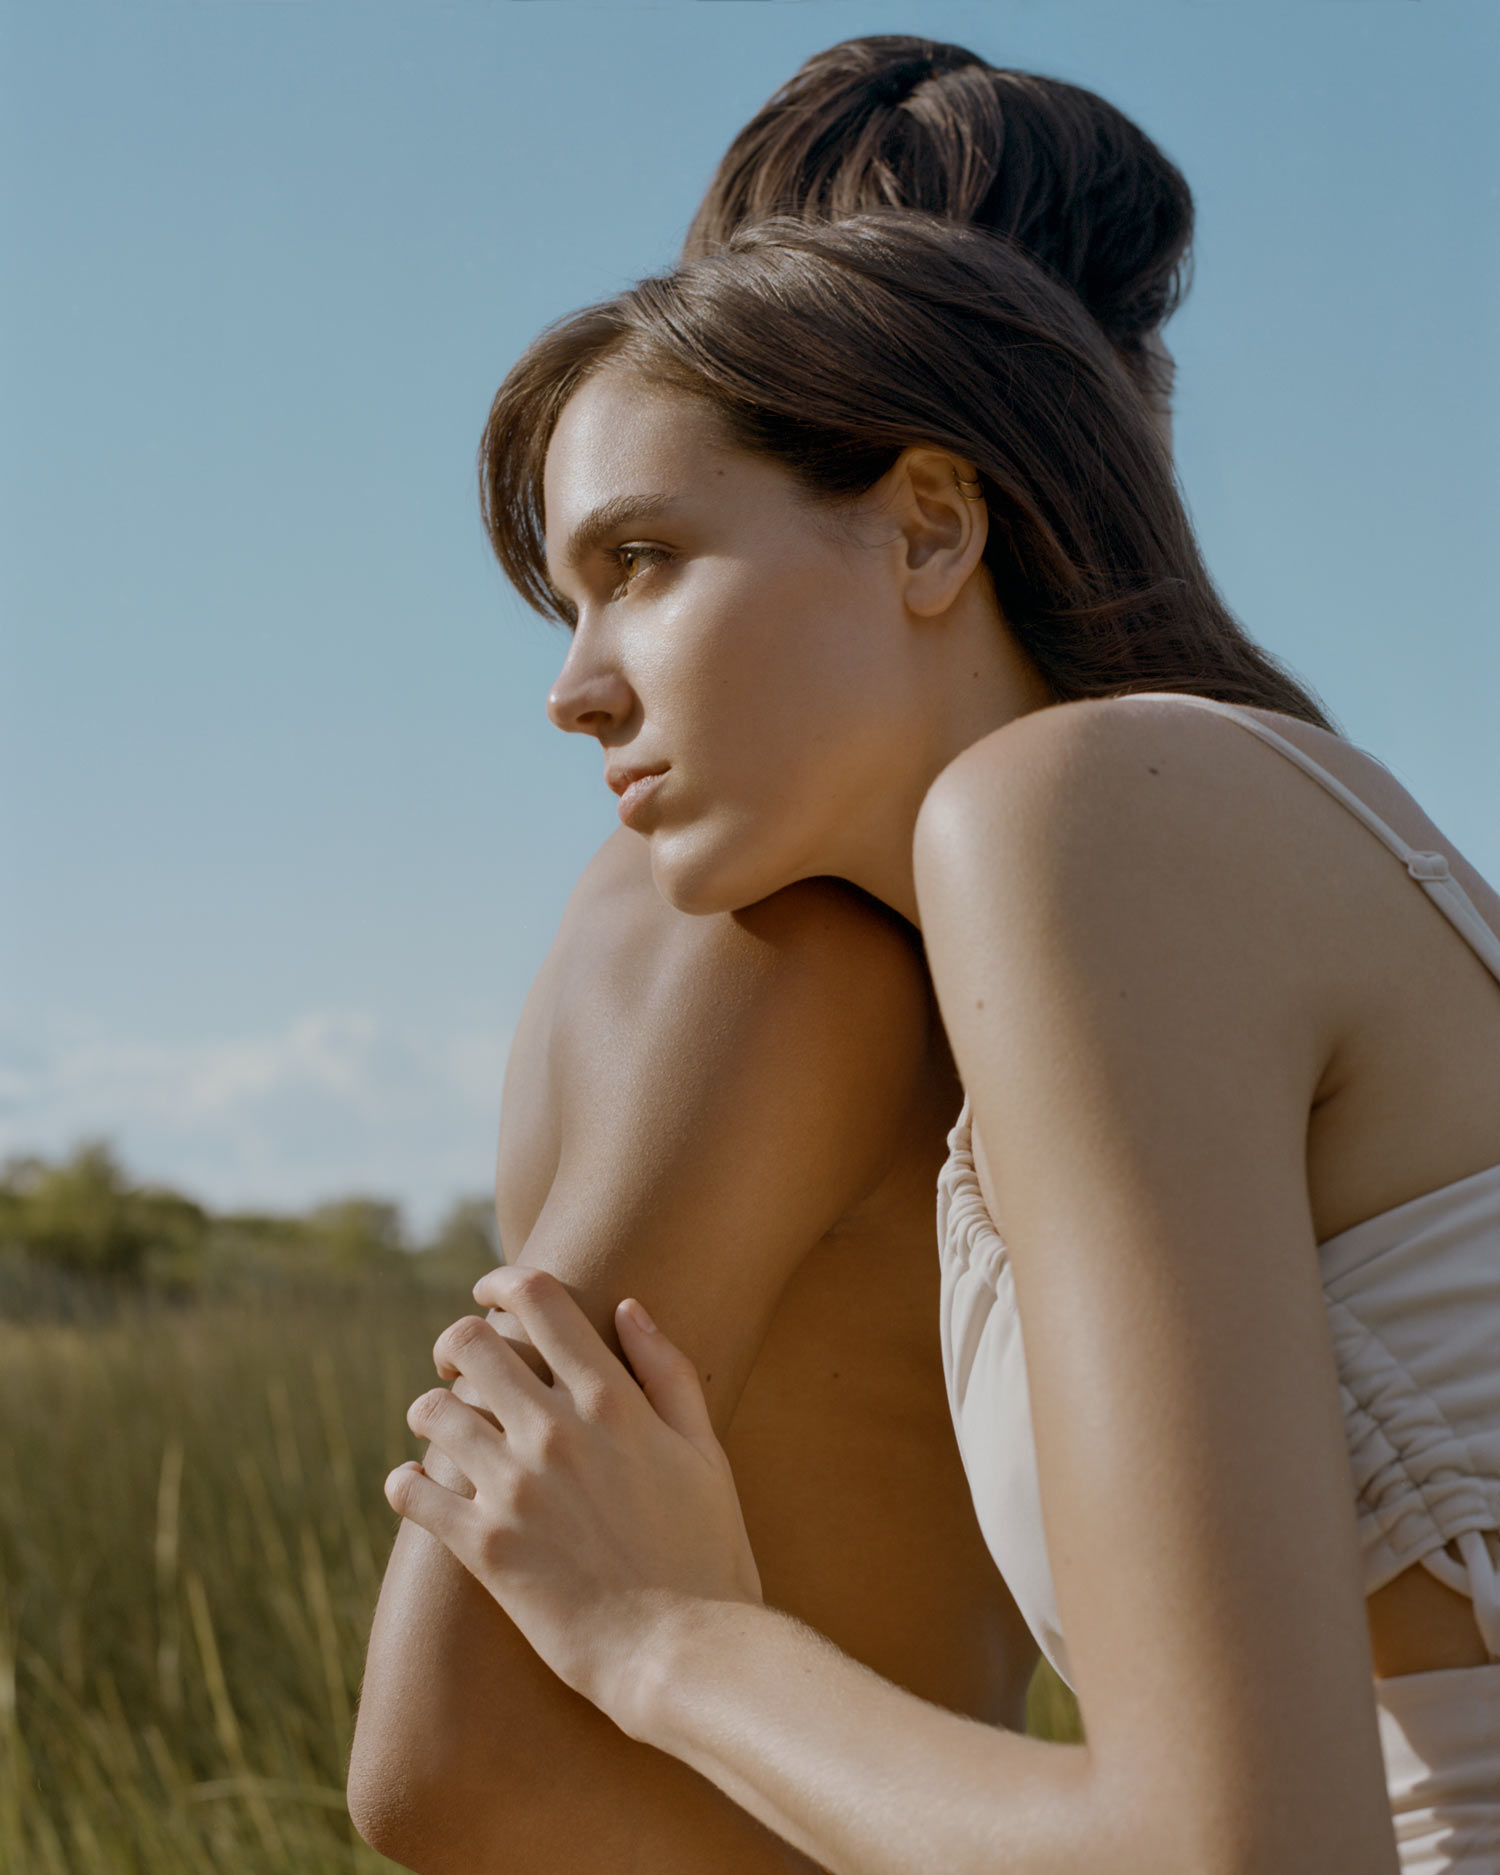 Female model Abby Blaine and male model Tyler Twitty, set against a blue sky and green grass. She is leaning on him. The sun is shining. she is wearing a beige Forever 21 dress, Photographed by New York photographer Maria Bruun, photographed using a Mamiya RZ67 camera and Kodak Portra 160 film.